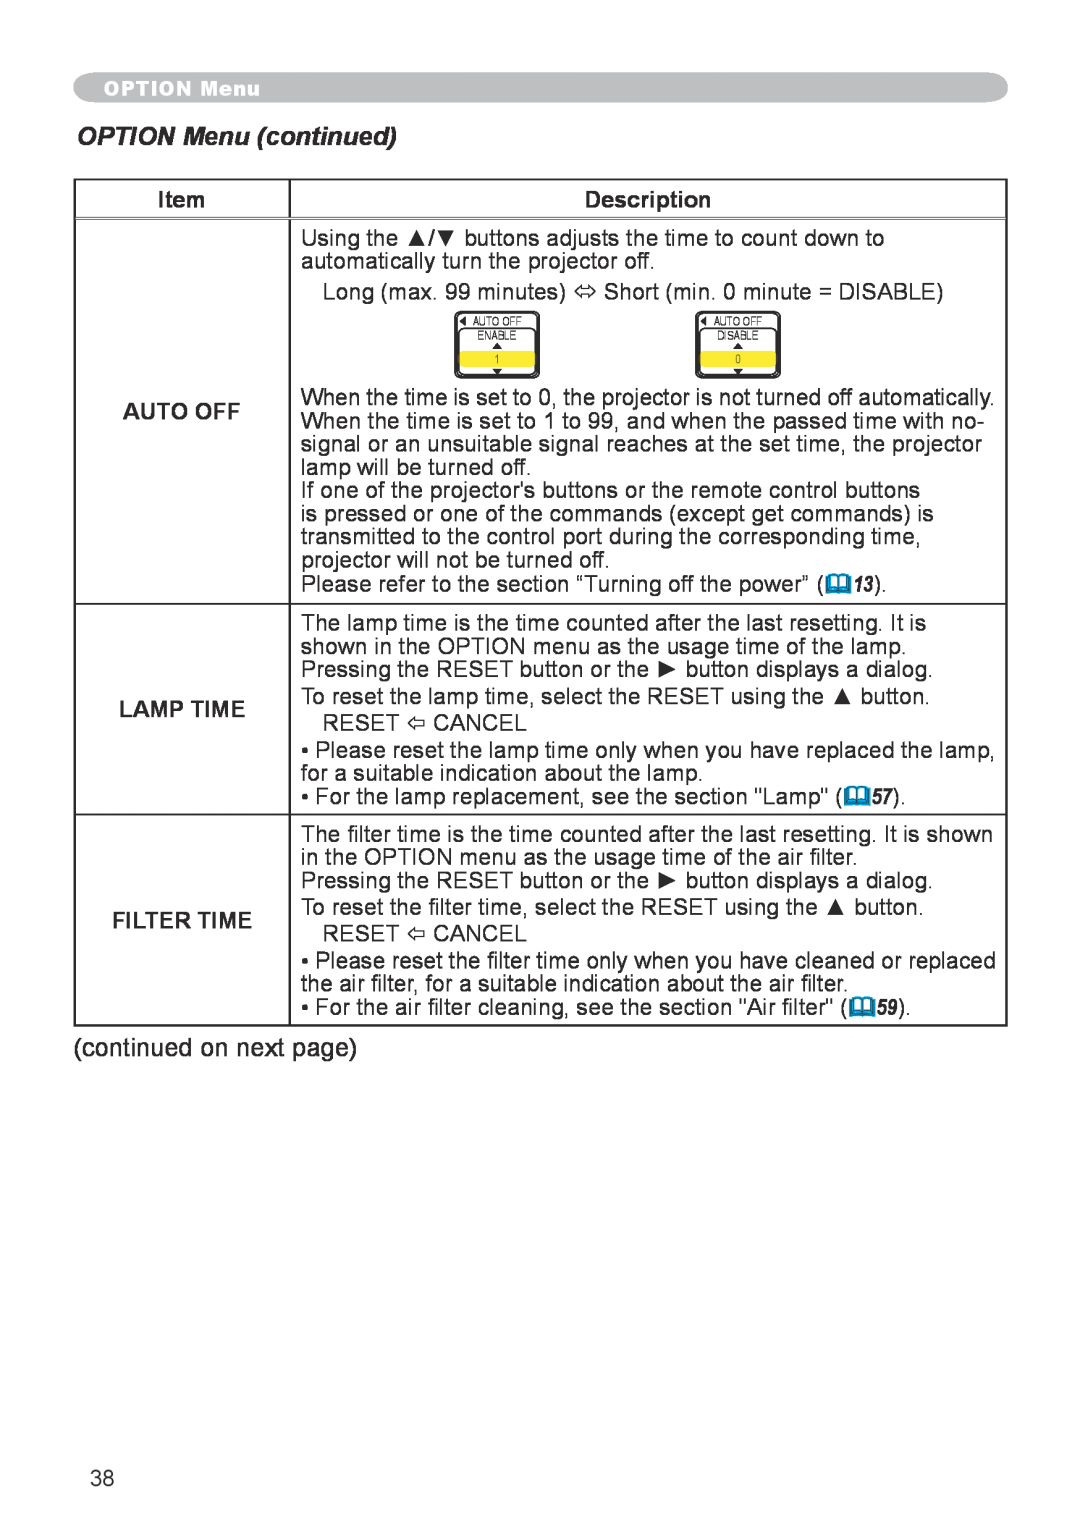 Apple CPX5, CPX1 user manual OPTION Menu continued, Description, Auto Off, Lamp Time, Filter Time 